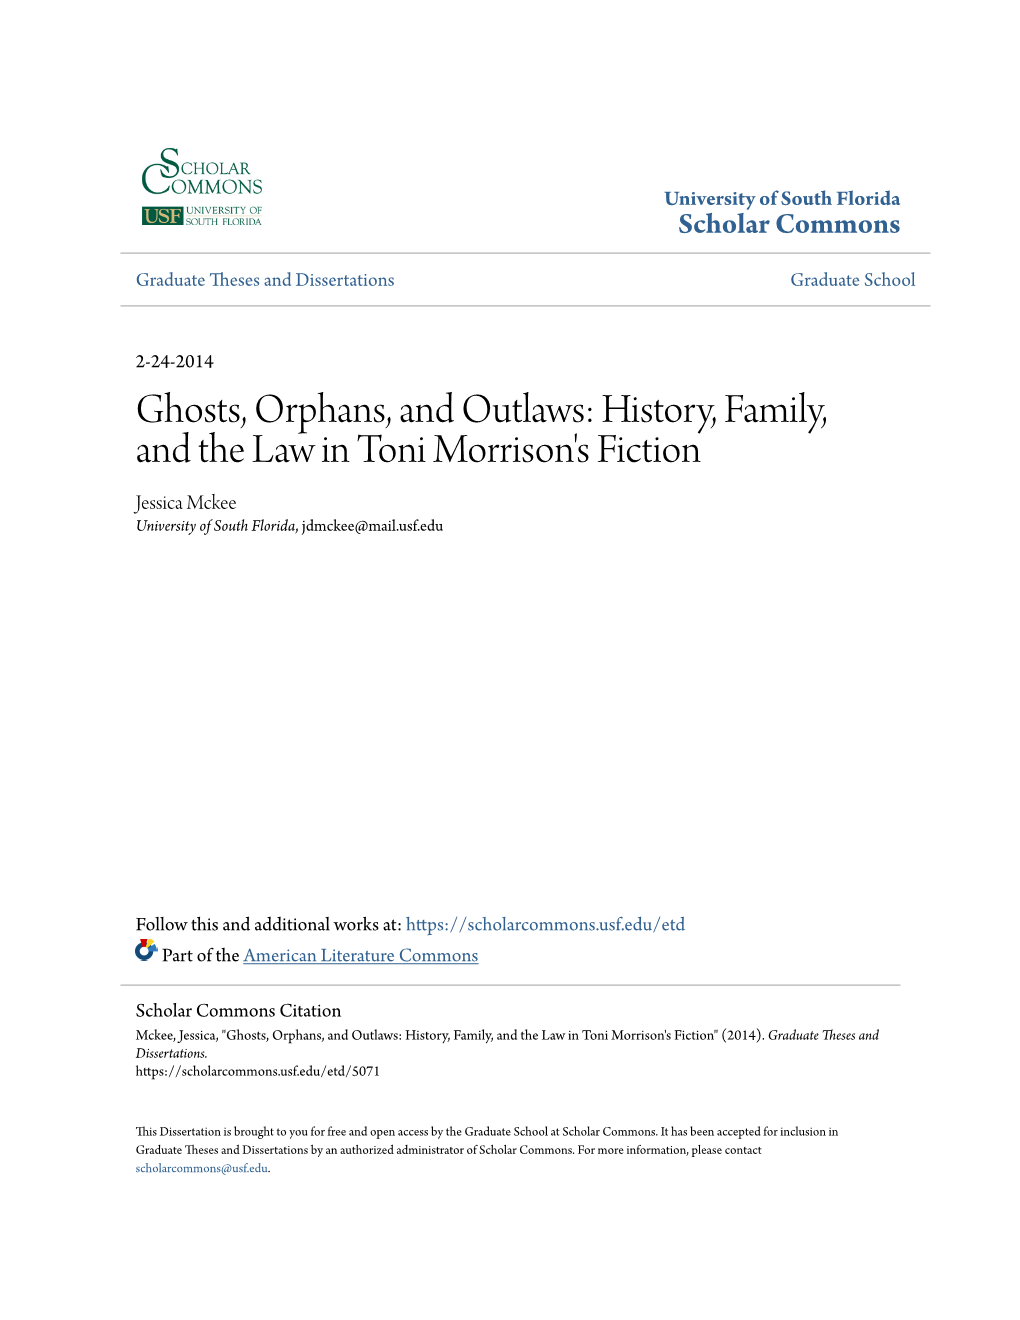 Ghosts, Orphans, and Outlaws: History, Family, and the Law in Toni Morrison's Fiction Jessica Mckee University of South Florida, Jdmckee@Mail.Usf.Edu